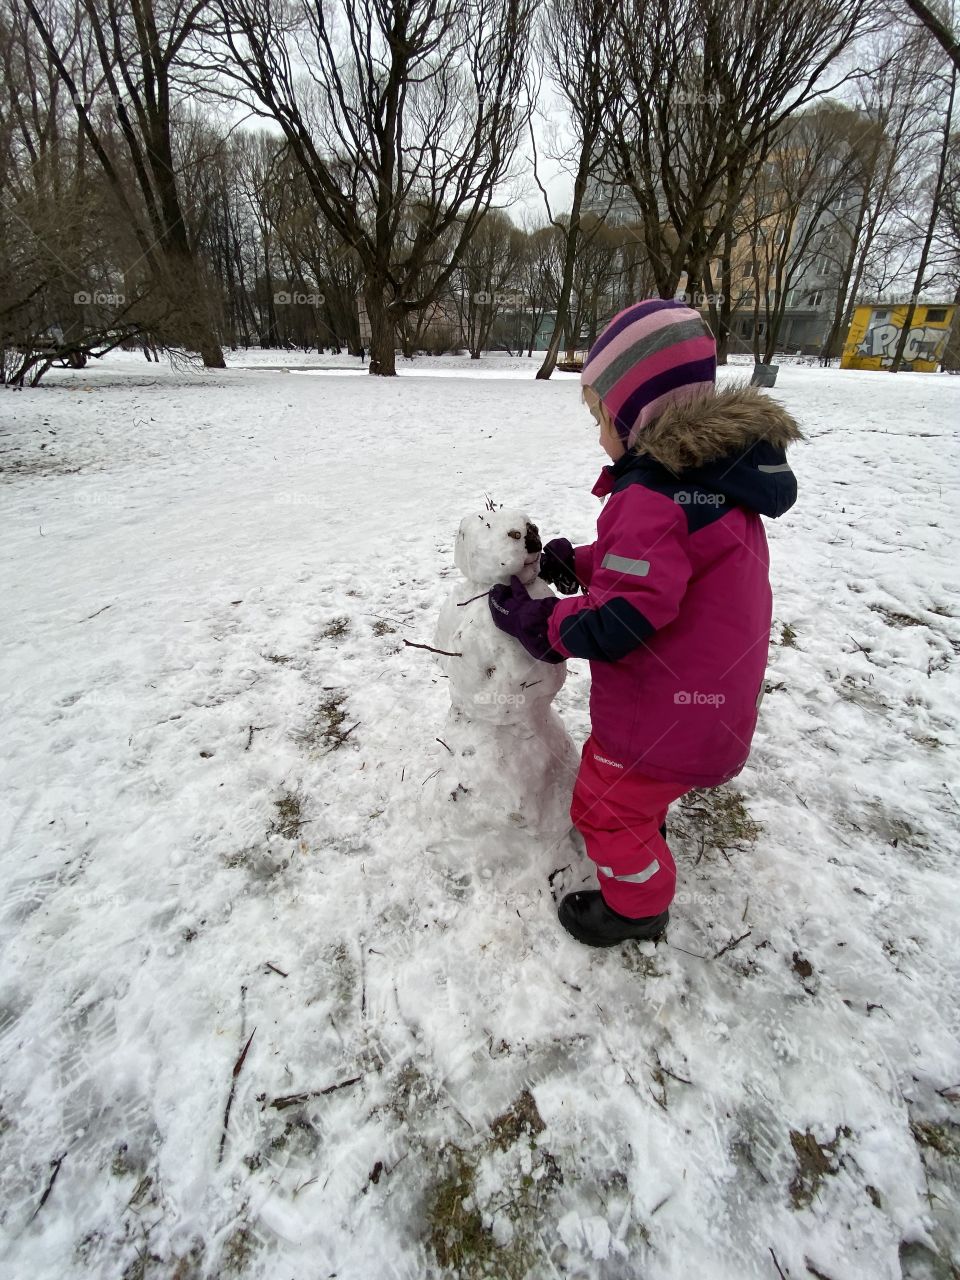 My girl is doing snowman